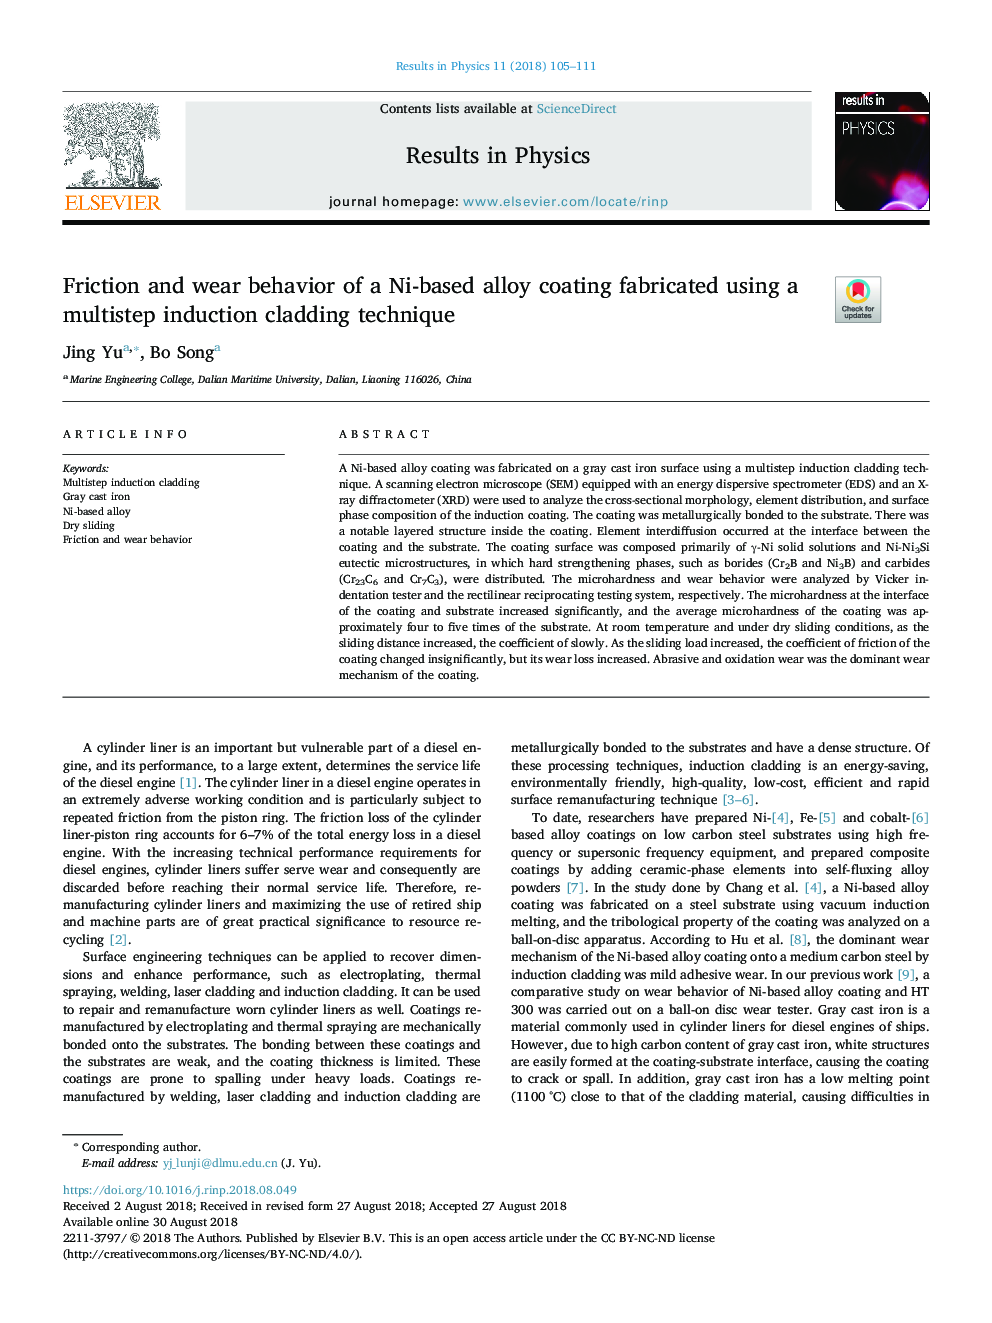 Friction and wear behavior of a Ni-based alloy coating fabricated using a multistep induction cladding technique